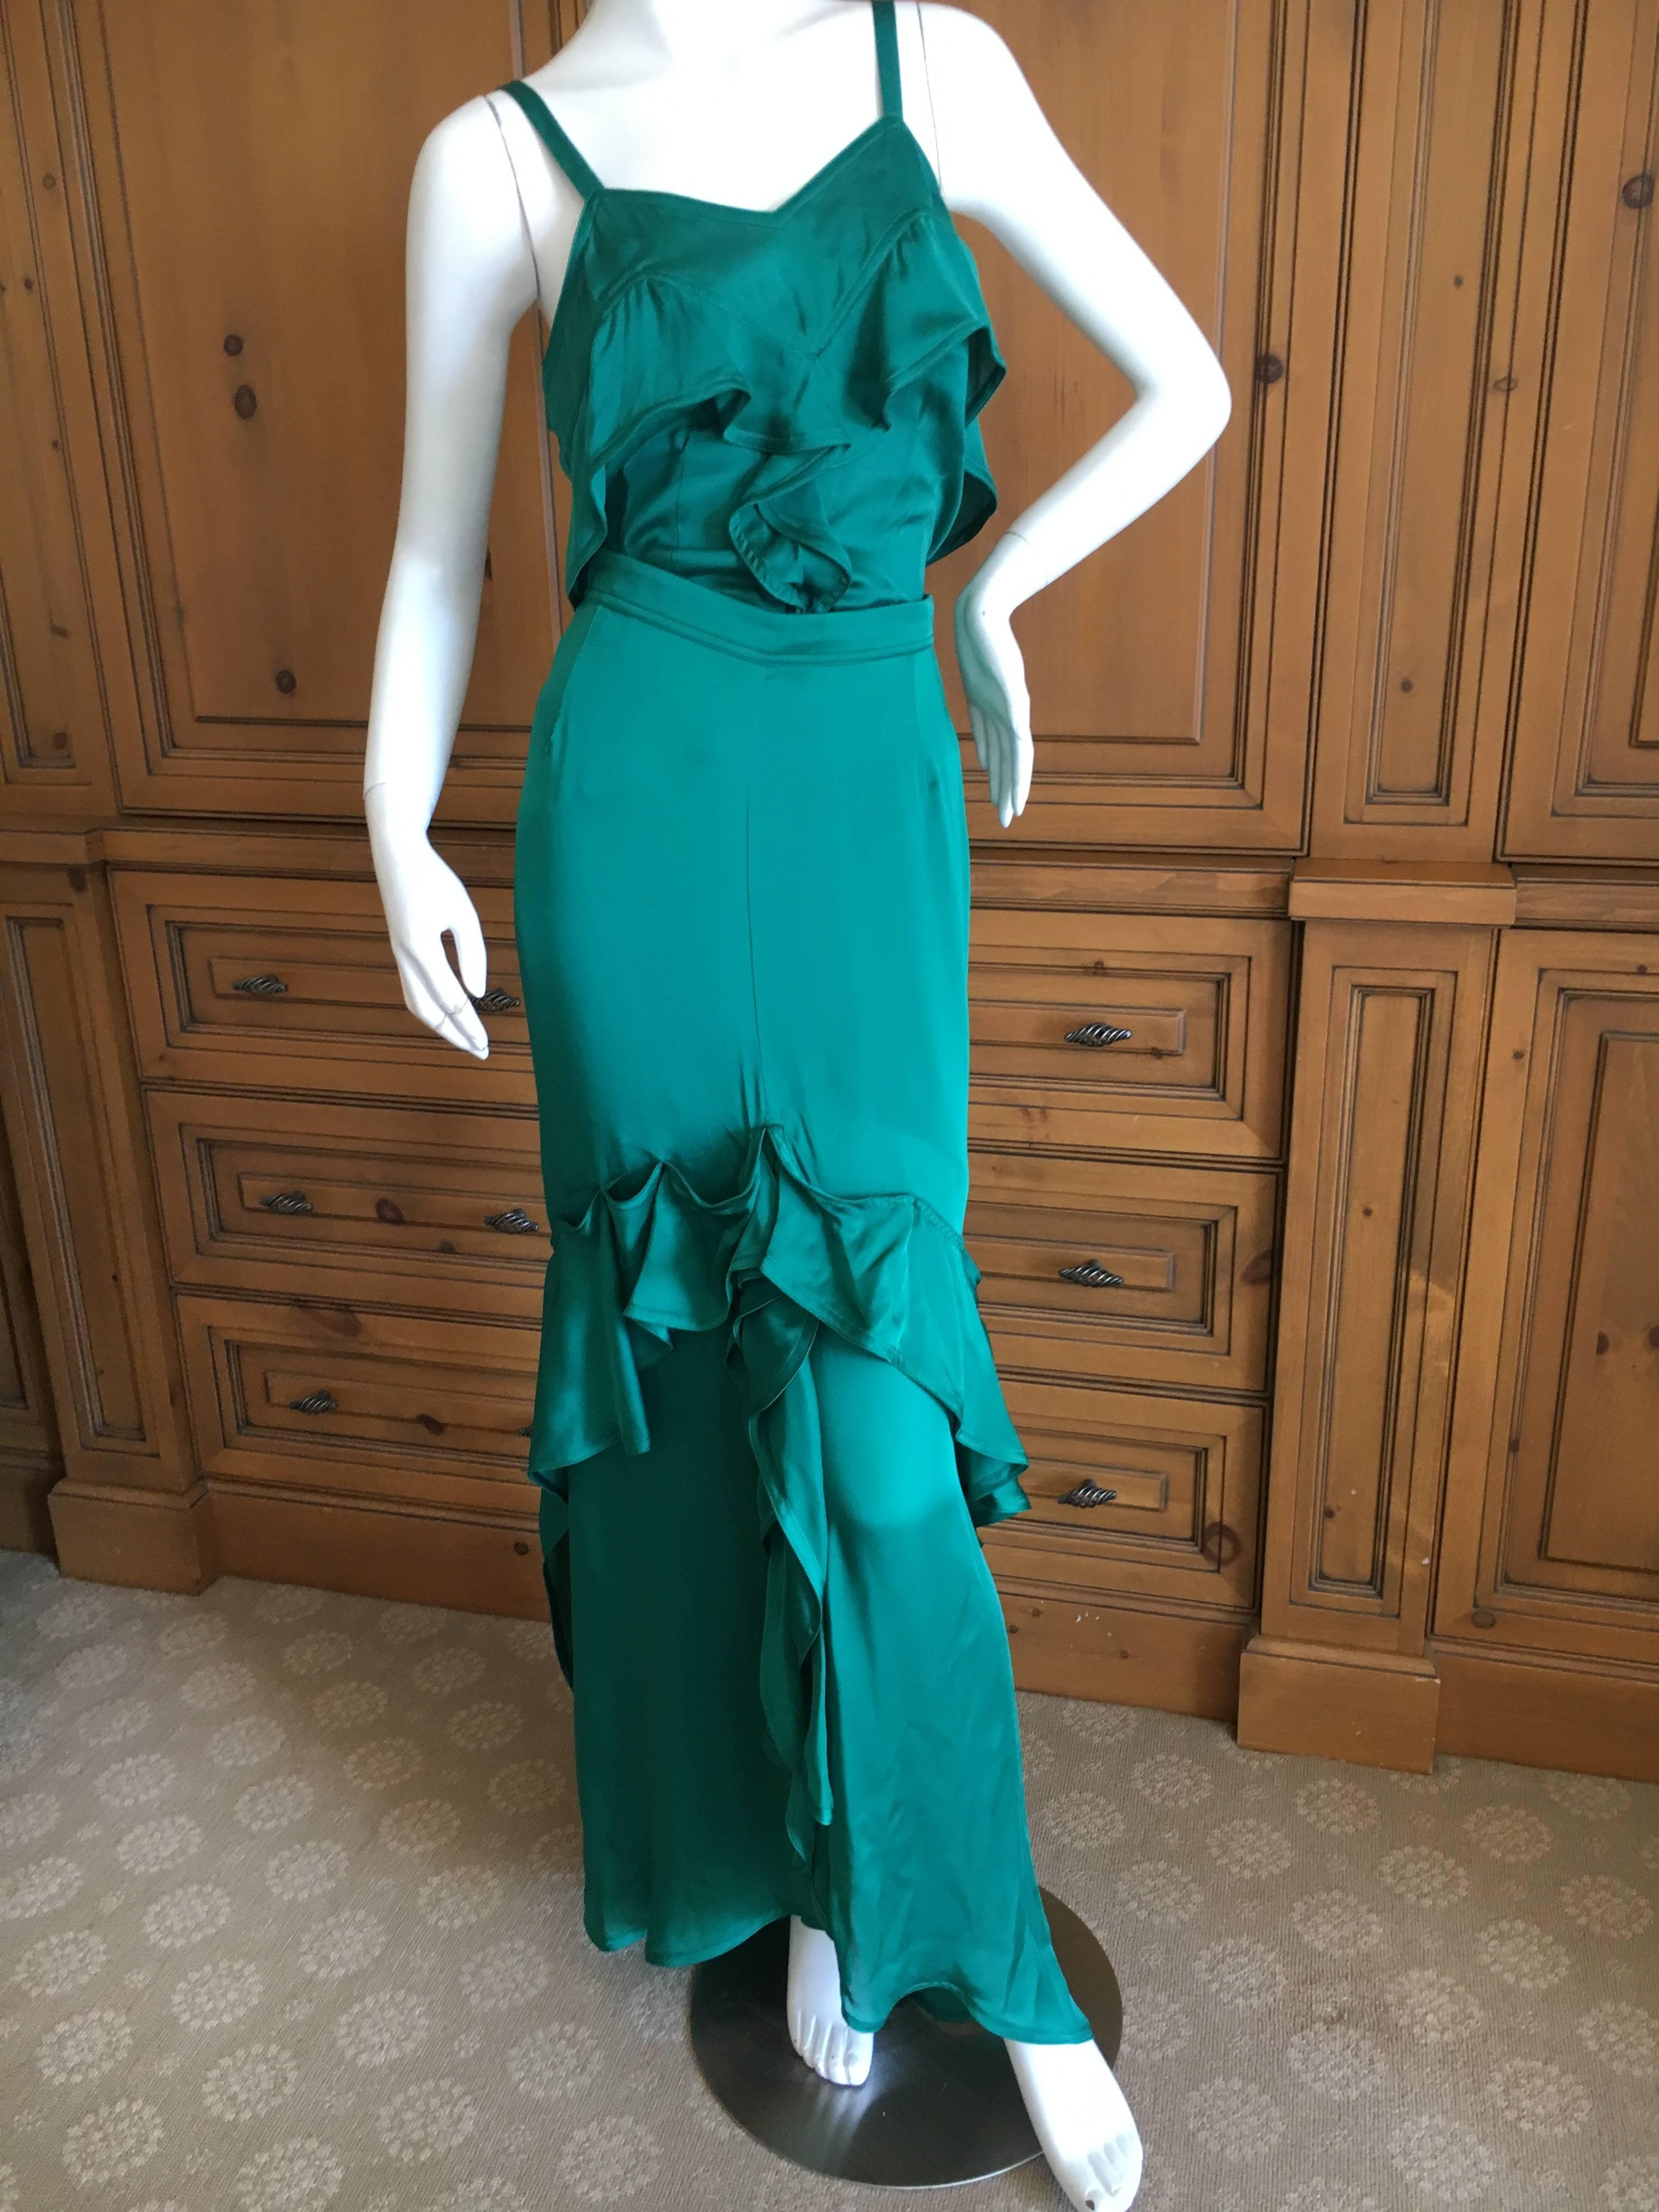 Yves Saint Laurent by Tom Ford 2003 Two Piece Ruffled Silk Dress New with Tags For Sale 2